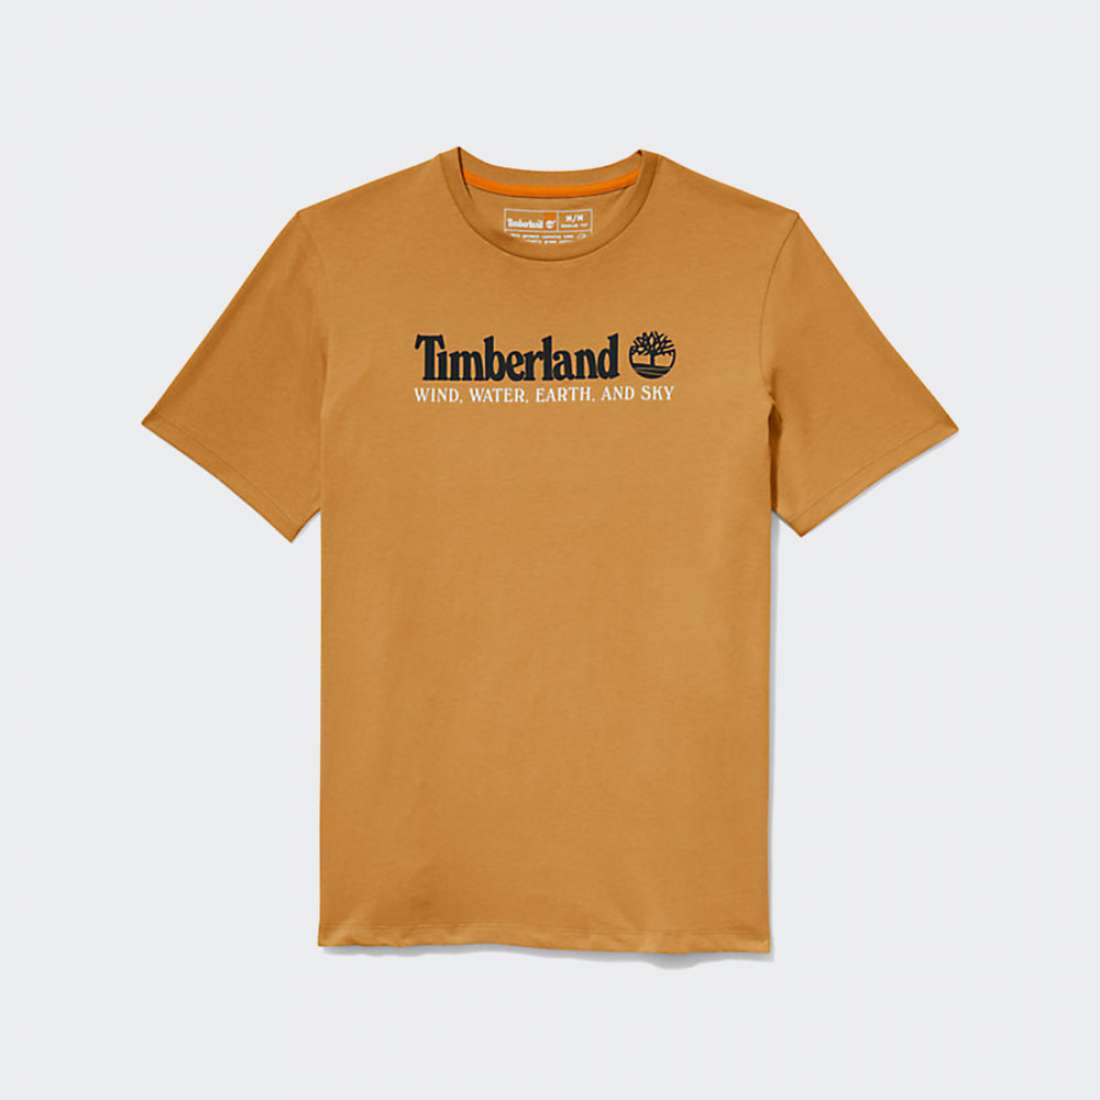 T-SHIRT TIMBERLAND WIND, WATER, EARTH AND SKY WHEAT BOOT